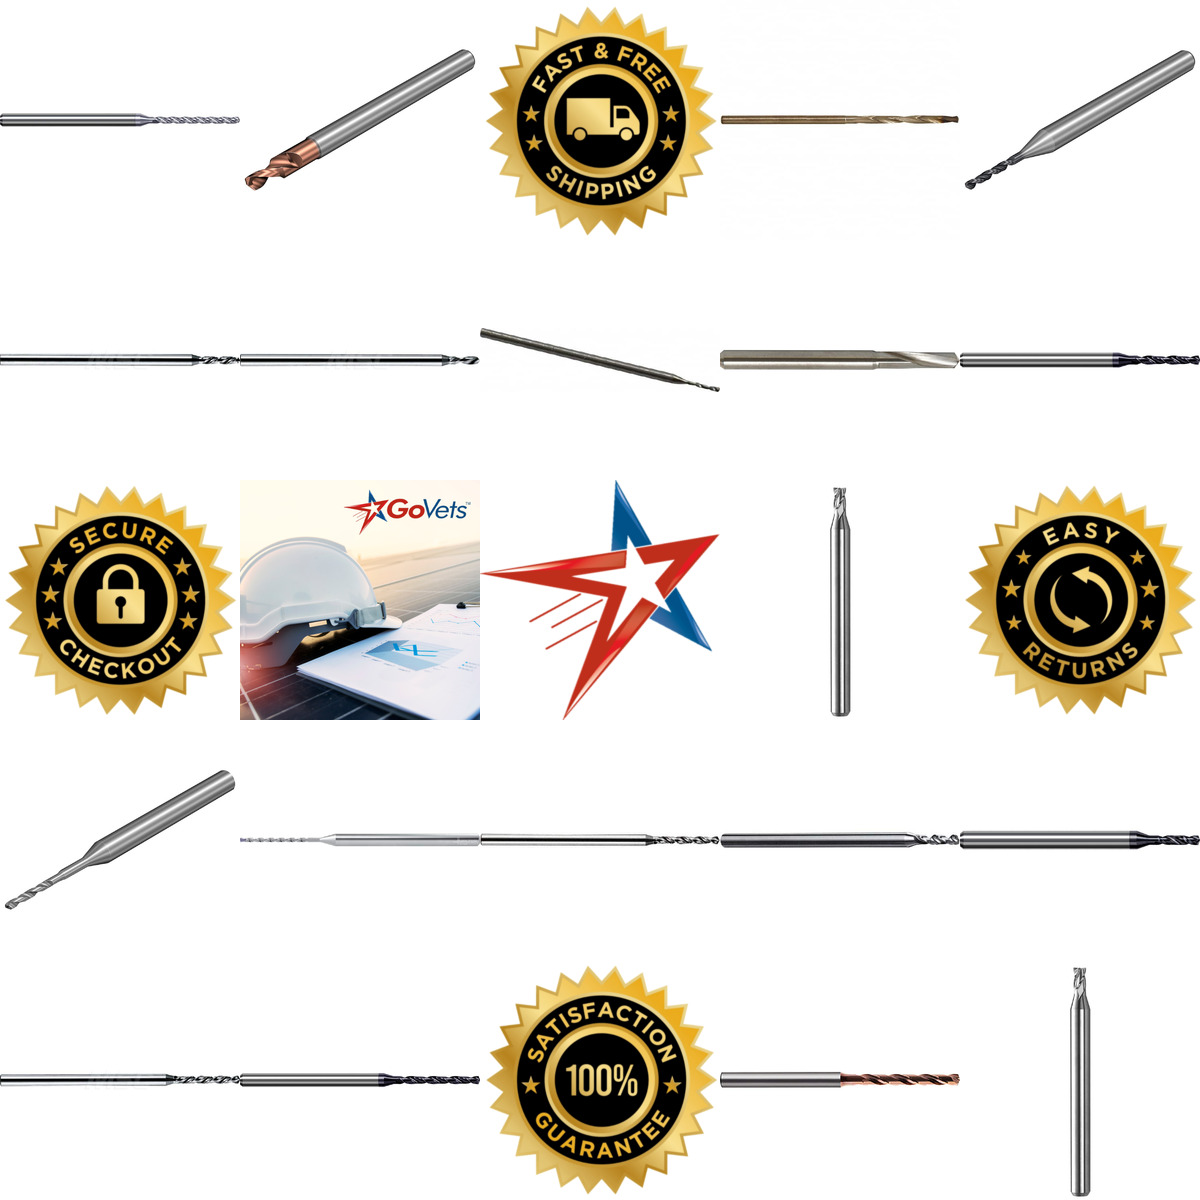 A selection of Micro Drill Bits products on GoVets